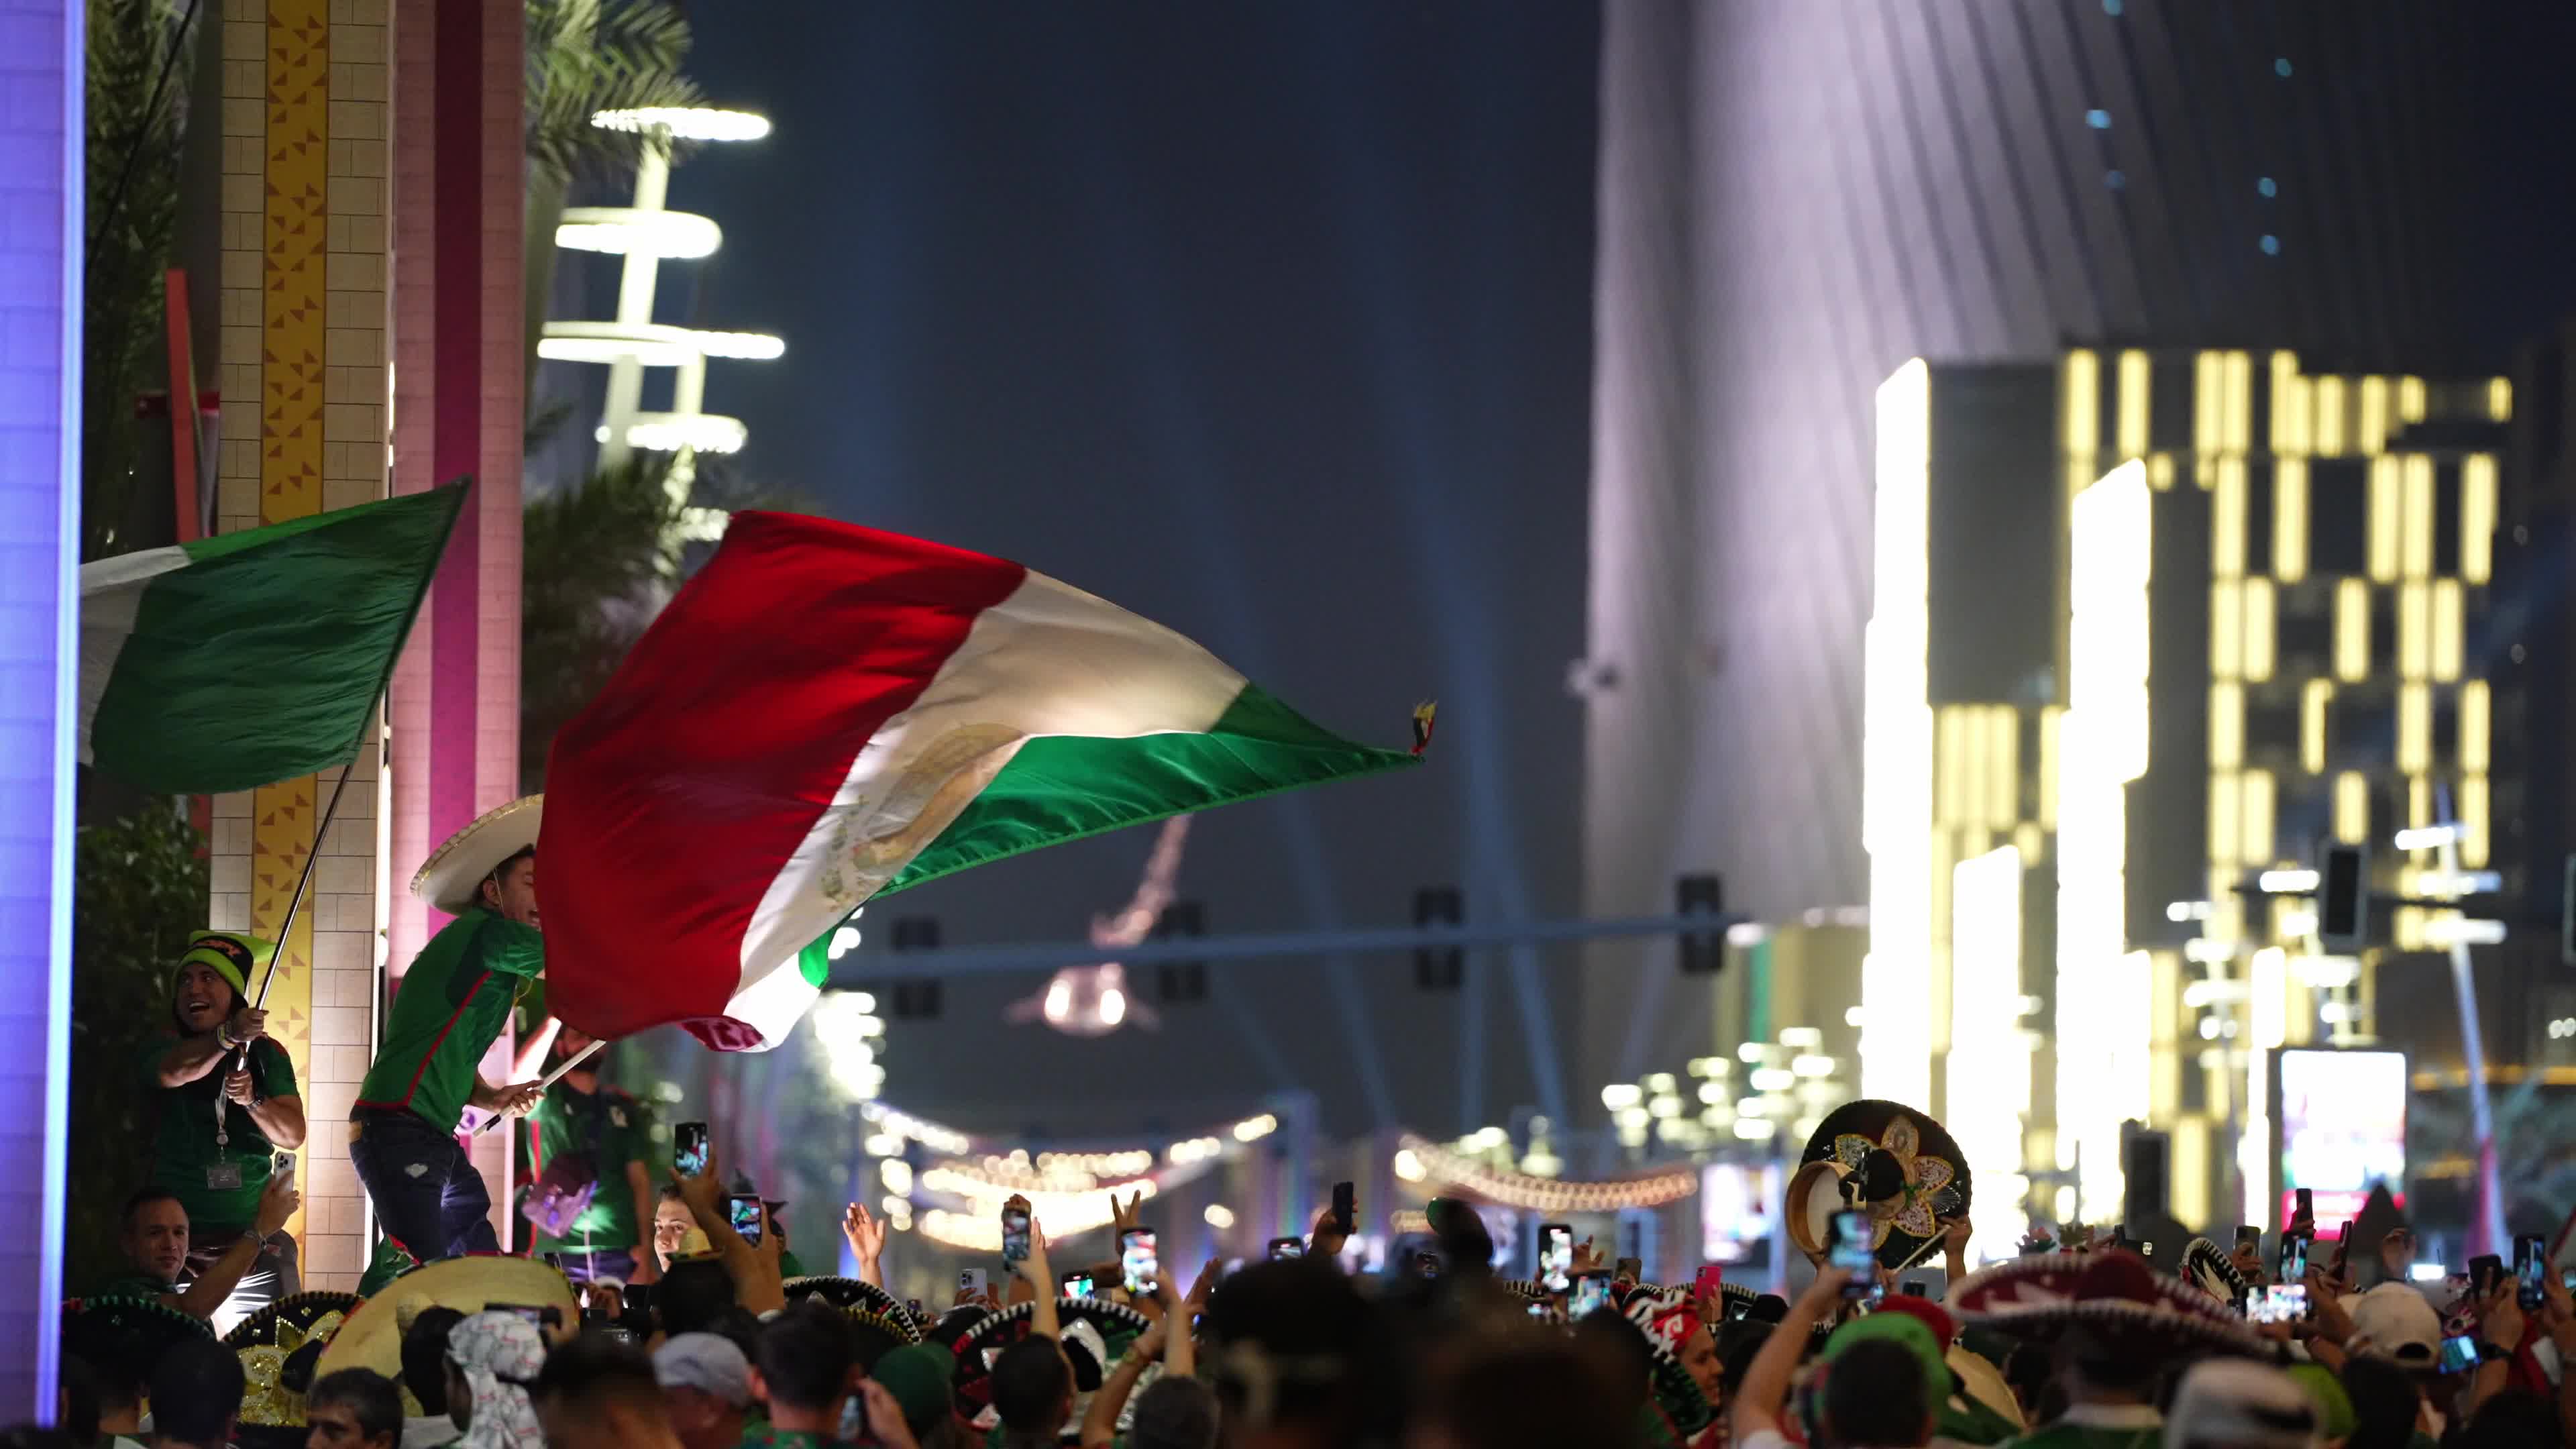 Fans arrive at Lusail Stadium For The FIFA World Cup Match Between Argentina v Mexico